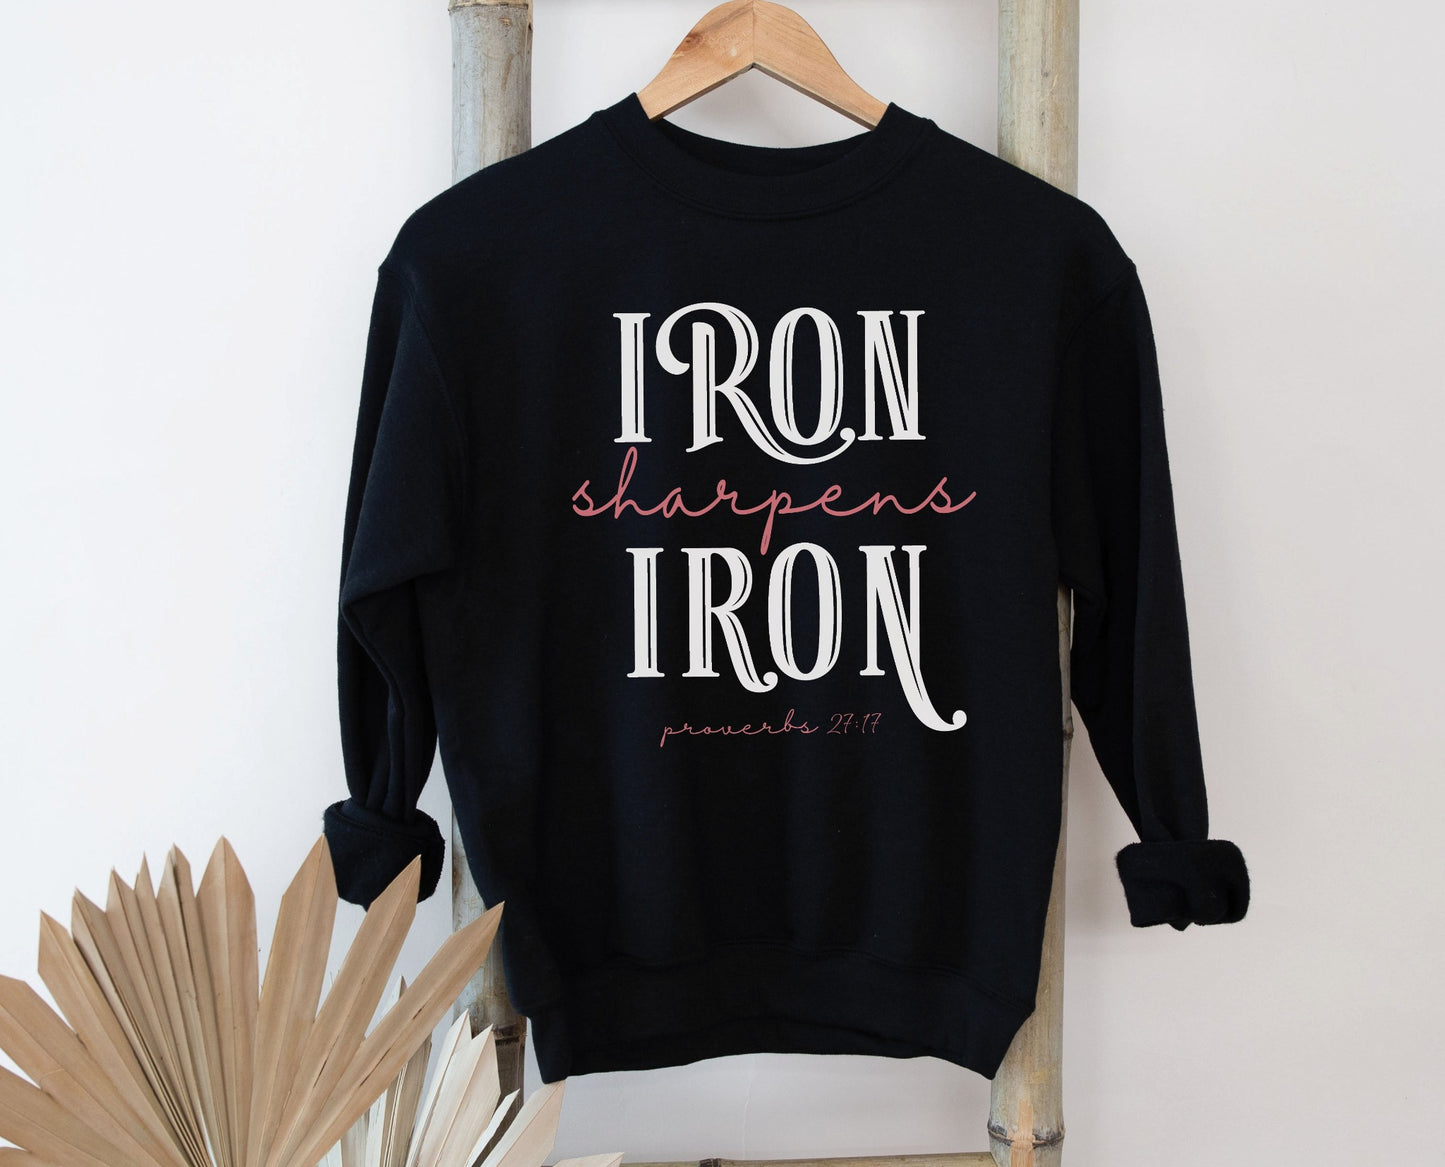 Iron Sharpens Iron Proverbs 27:17 Christian aesthetic design printed in white and mauve on cozy black unisex crewneck sweatshirt for women's groups